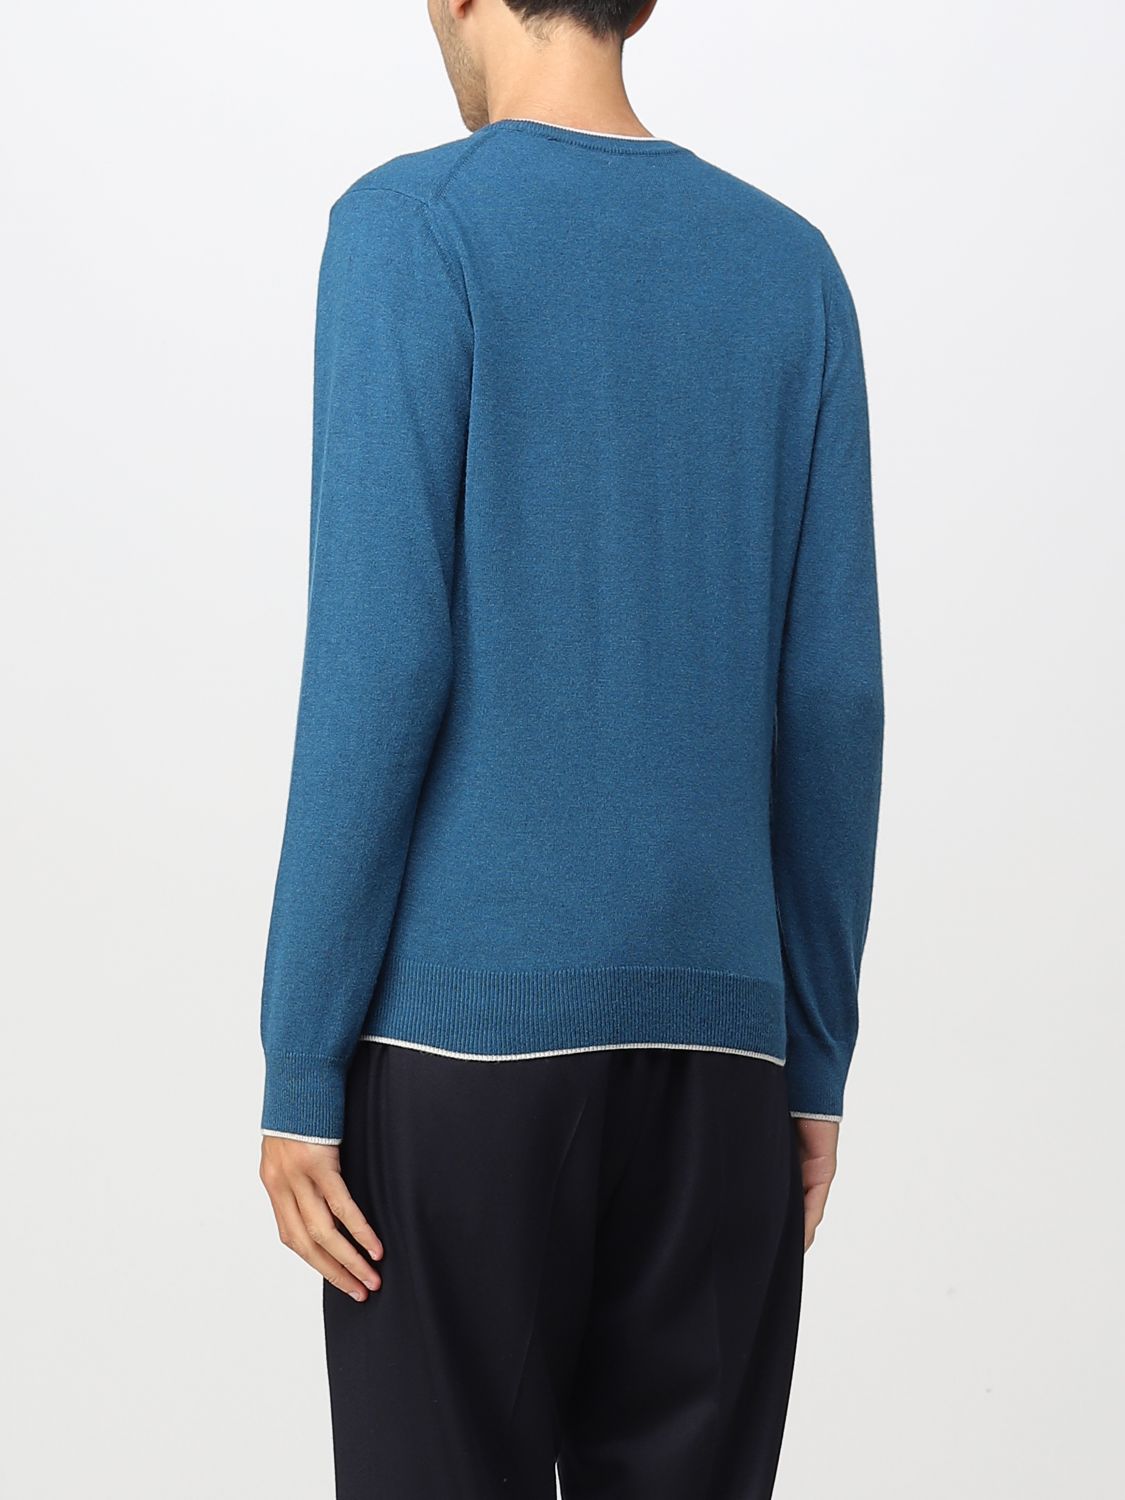 NORTH SAILS: sweater for man - Blue 1 | North Sails sweater 699513 ...